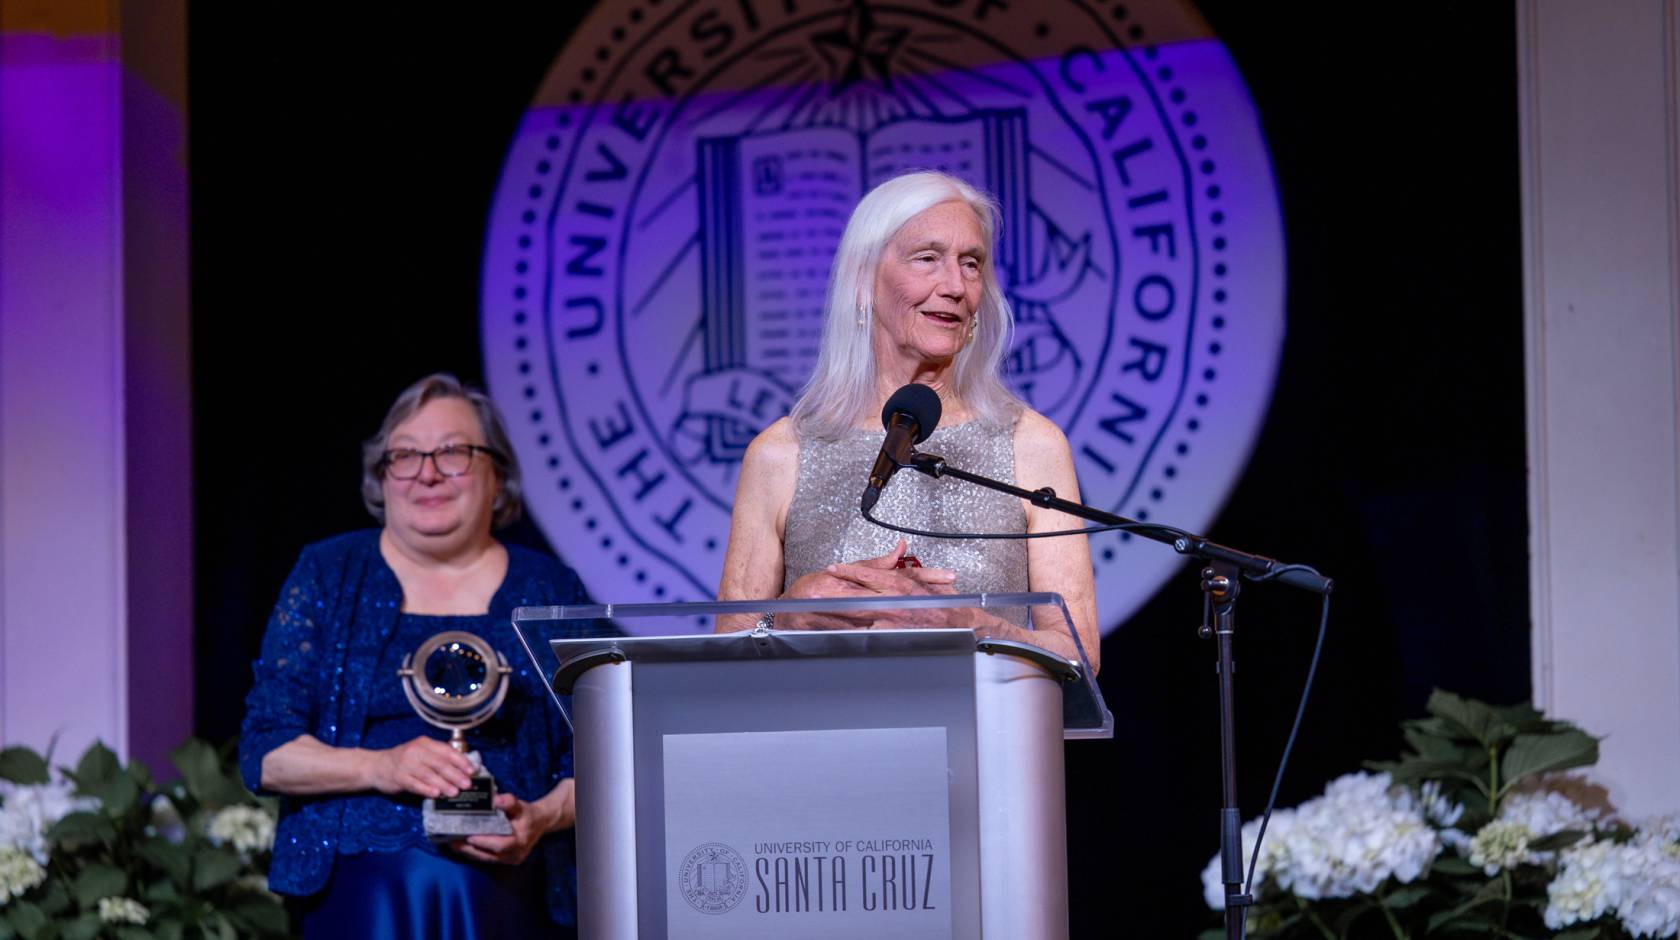 Woman with long white hair (Julie Packard) in silvery dress at a podium; woman in blue dress with short gray hair, Chancellor Larive, holding an award, stands behind